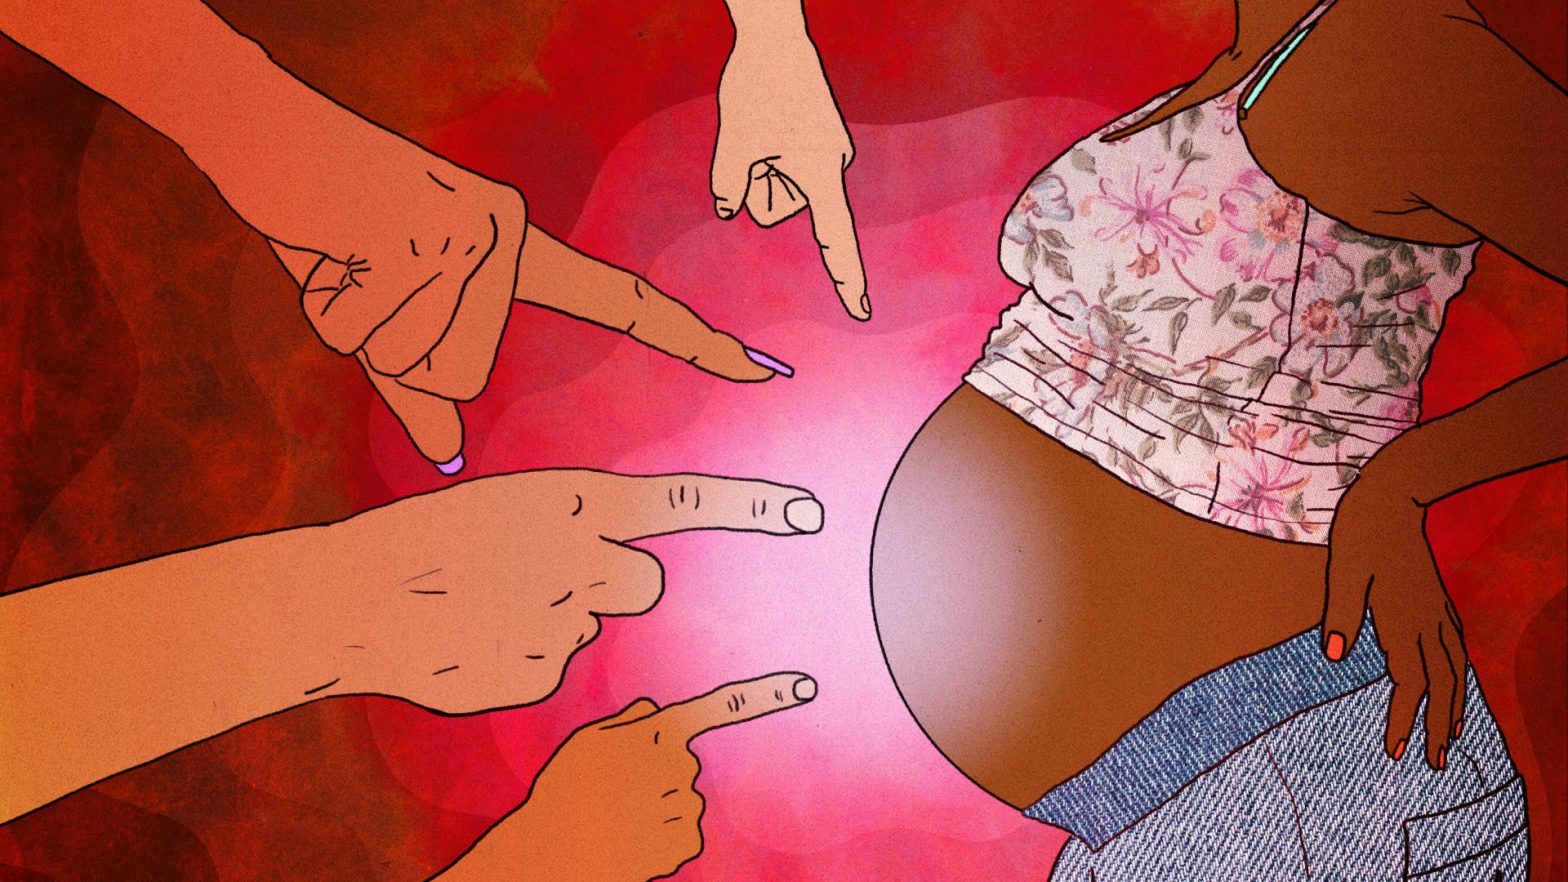 Illustration showing hands pointing in an accusing way at the pregnant belly of a Black woman